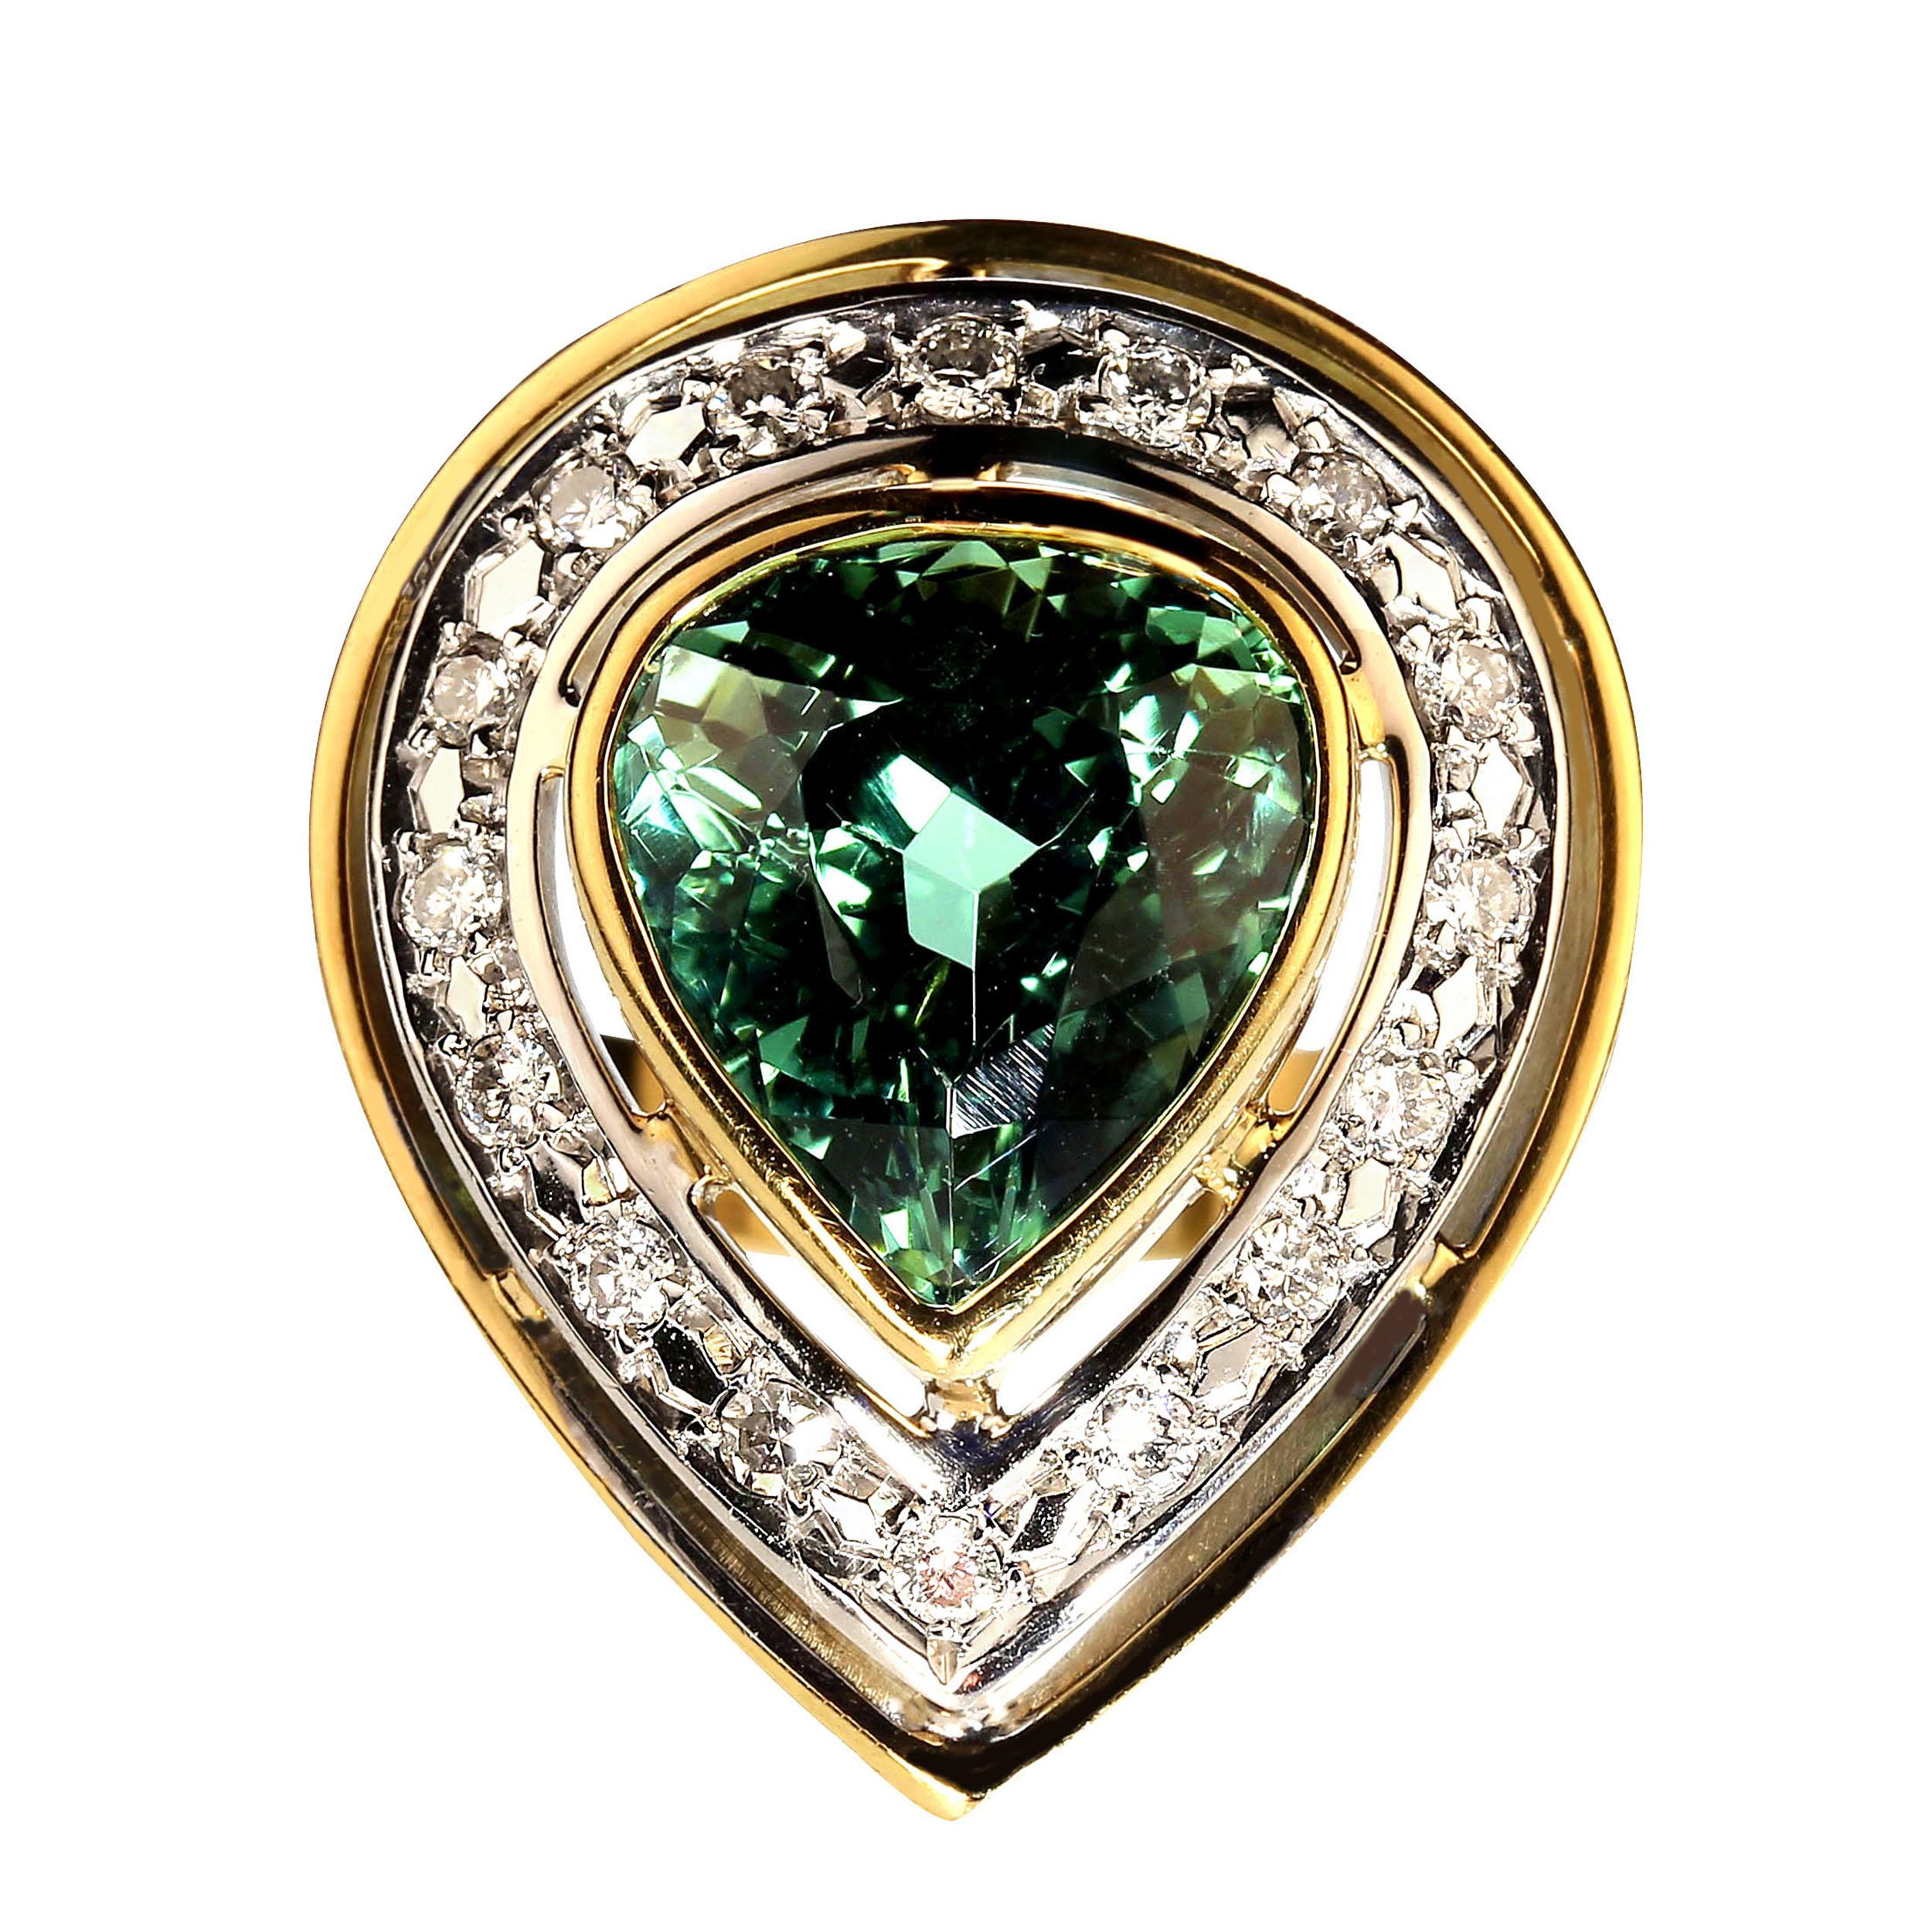 Unique pear shaped blue green Tourmaline ring. This gorgeous ring features a blue green pear shaped Brazilian Tourmaline bezel set in 18K yellow gold.  That is surrounded with a band of 18K white gold pave set with diamonds. It is encircled with